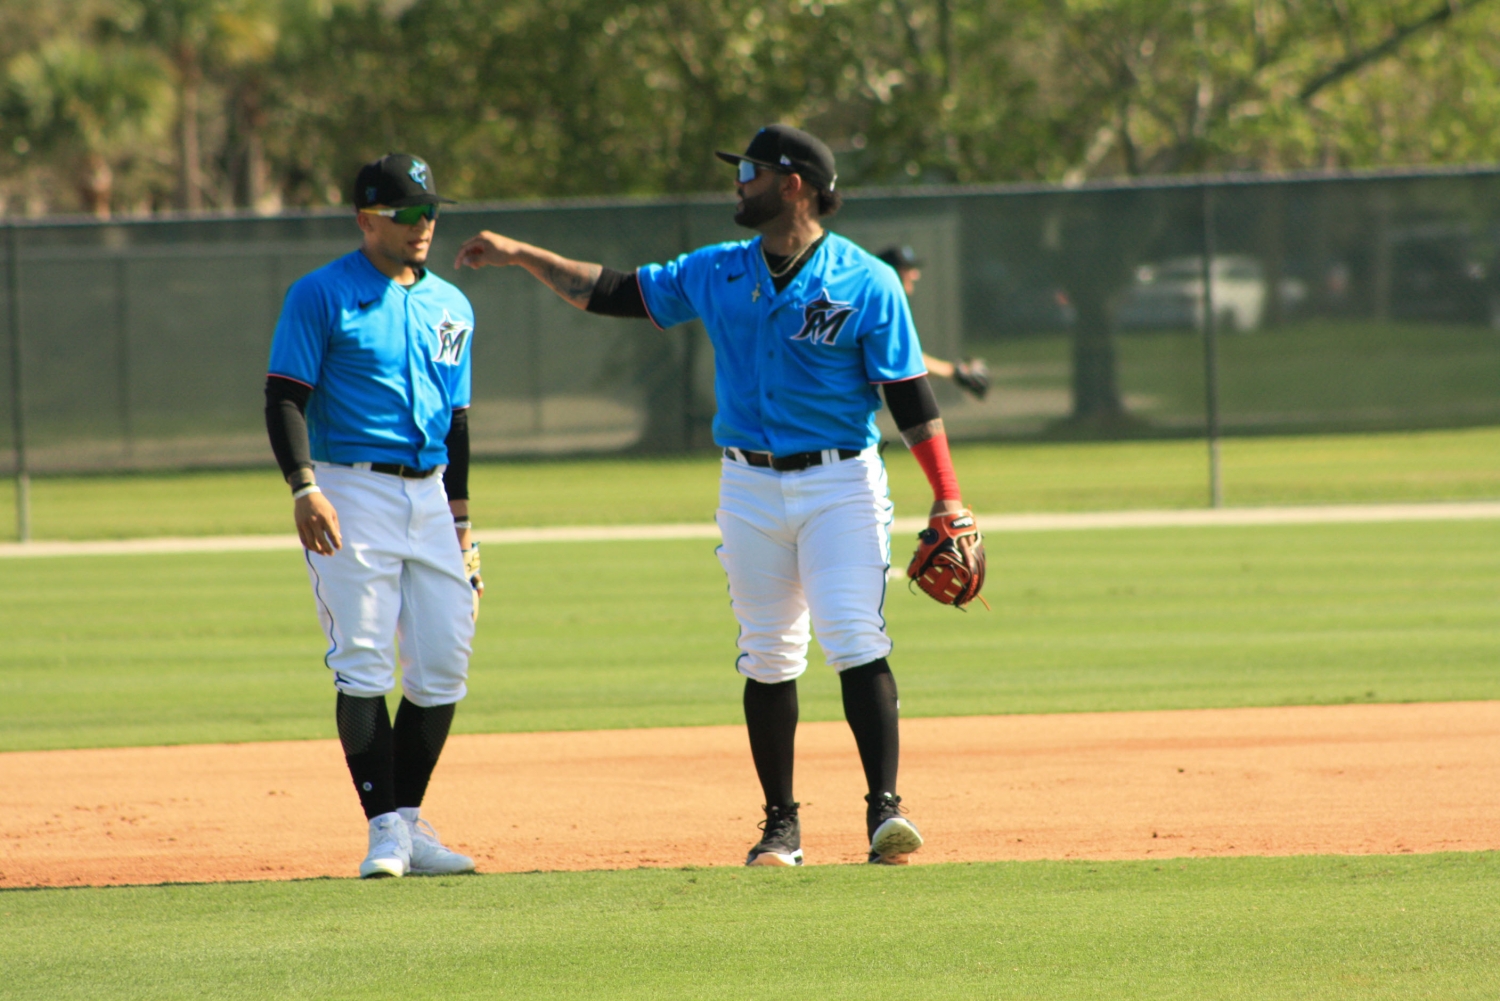 Jonathan Villar, right, works with Isan Diaz on the first day of spring training. Villar, an infielder, could end up in center field. (Craig Davis for Five Reasons Sports)